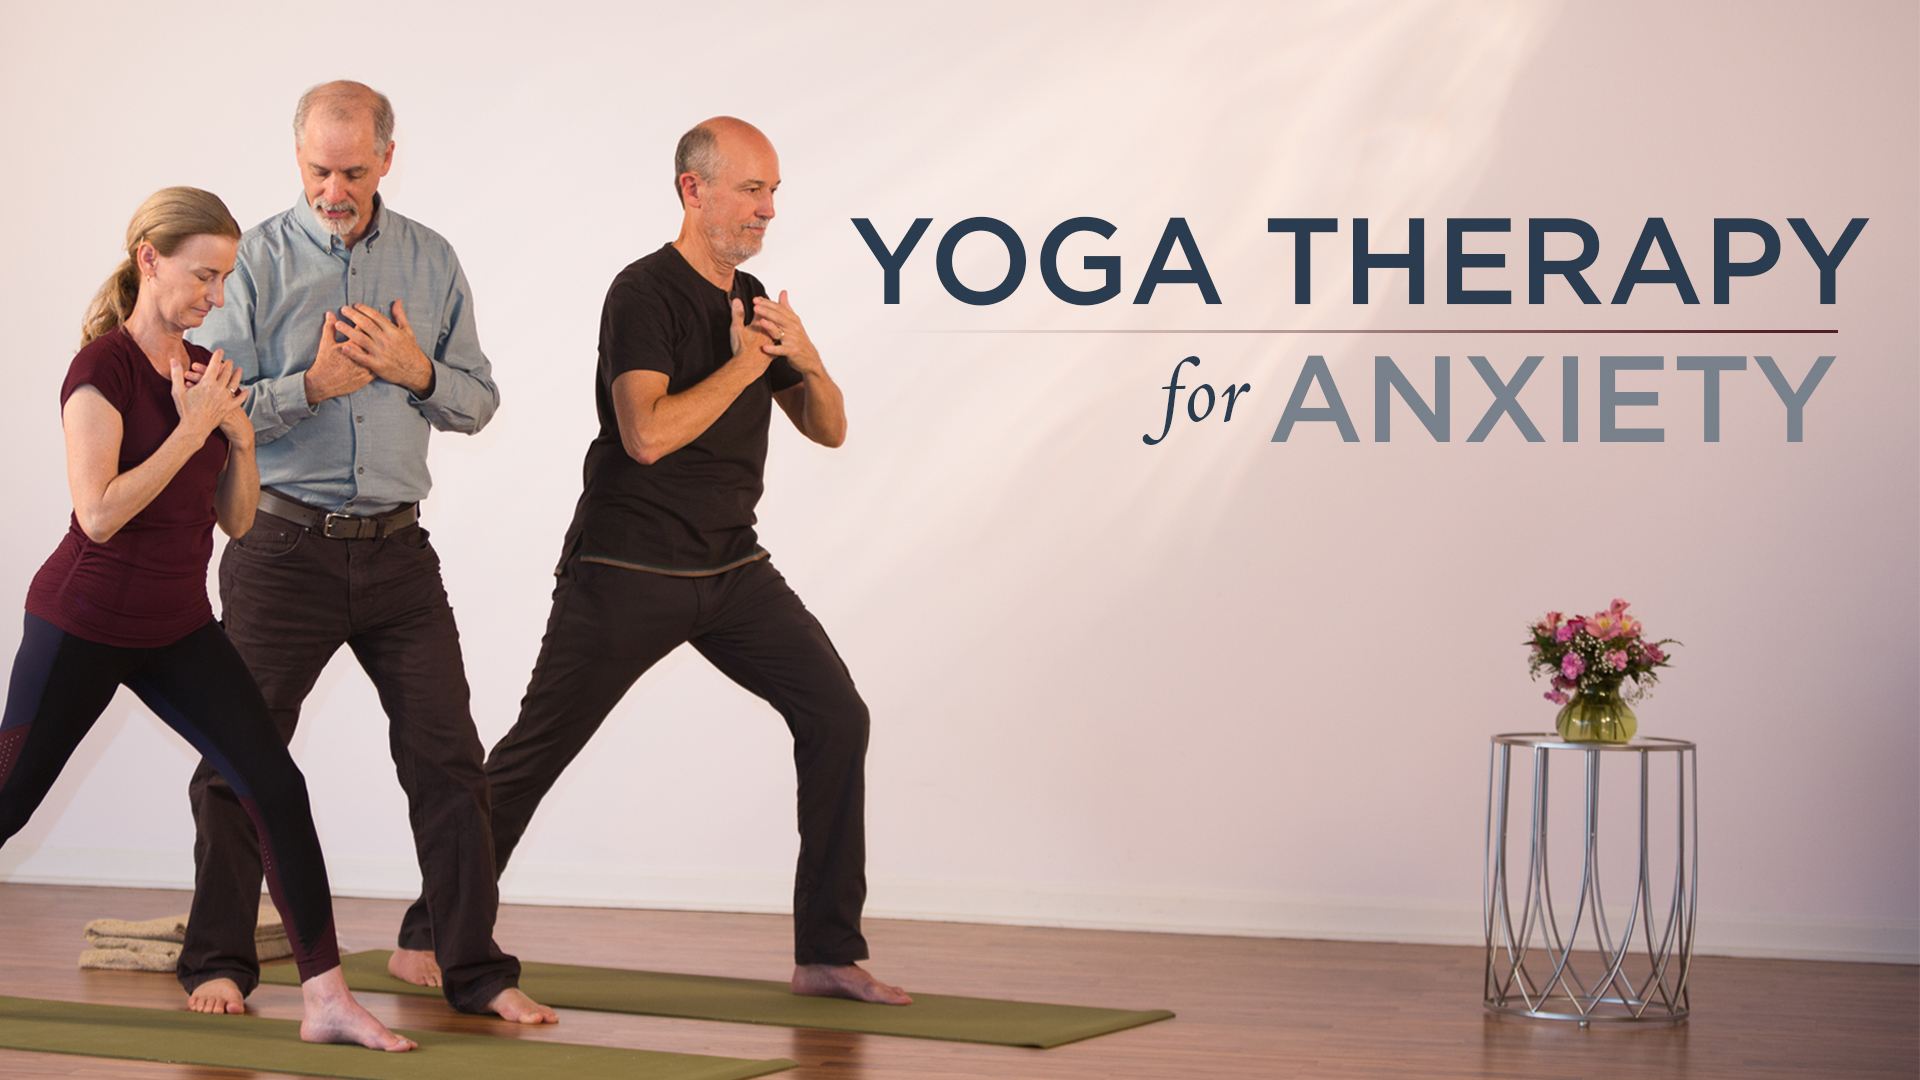 Want to be a yoga therapist?